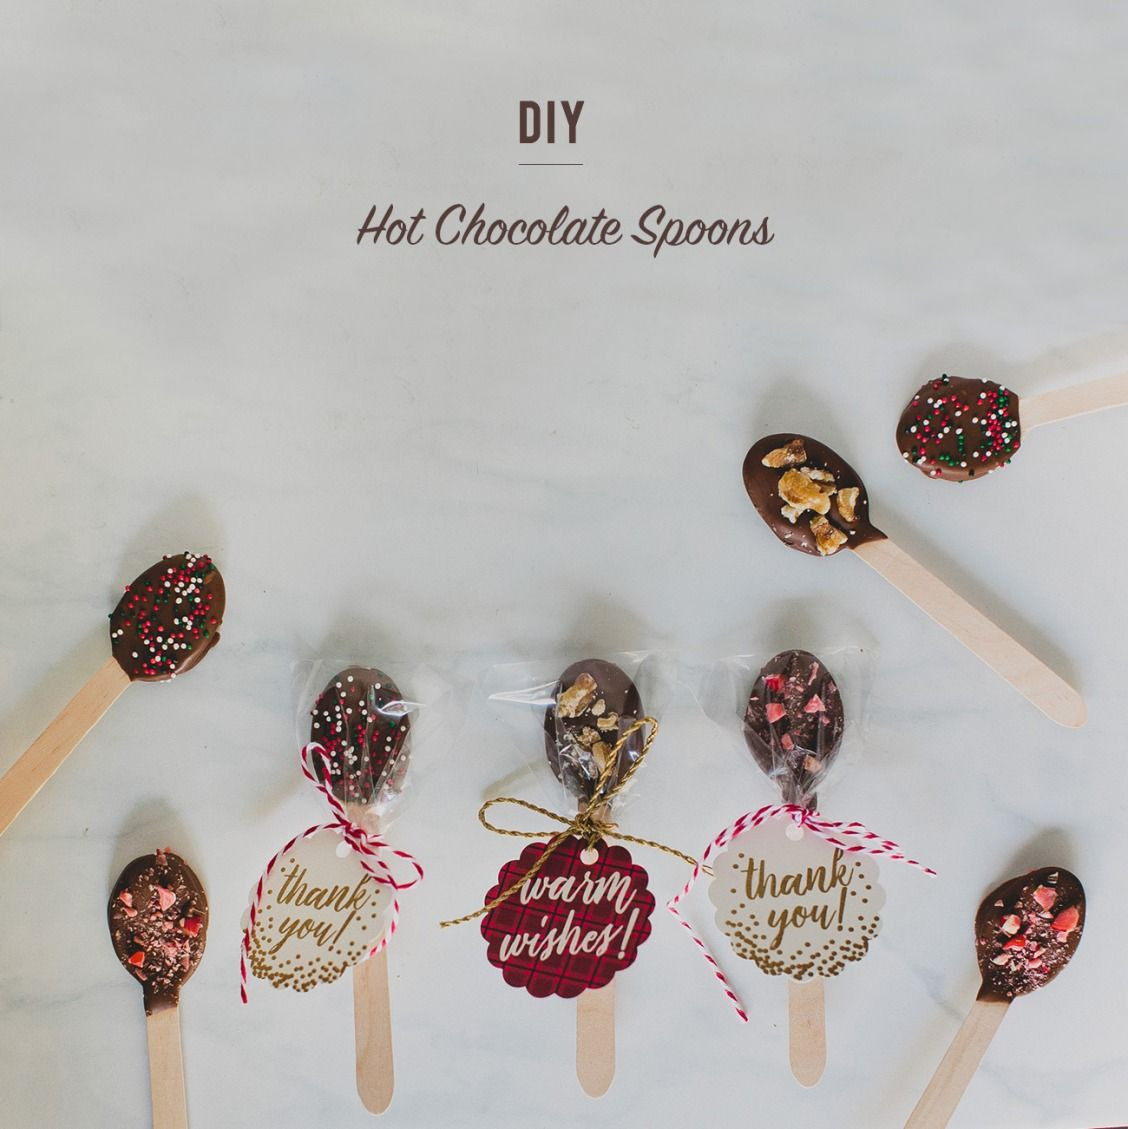 DIY Hot Chocolate Wedding Favors
 DIY Hot Chocolate Spoons for Favors